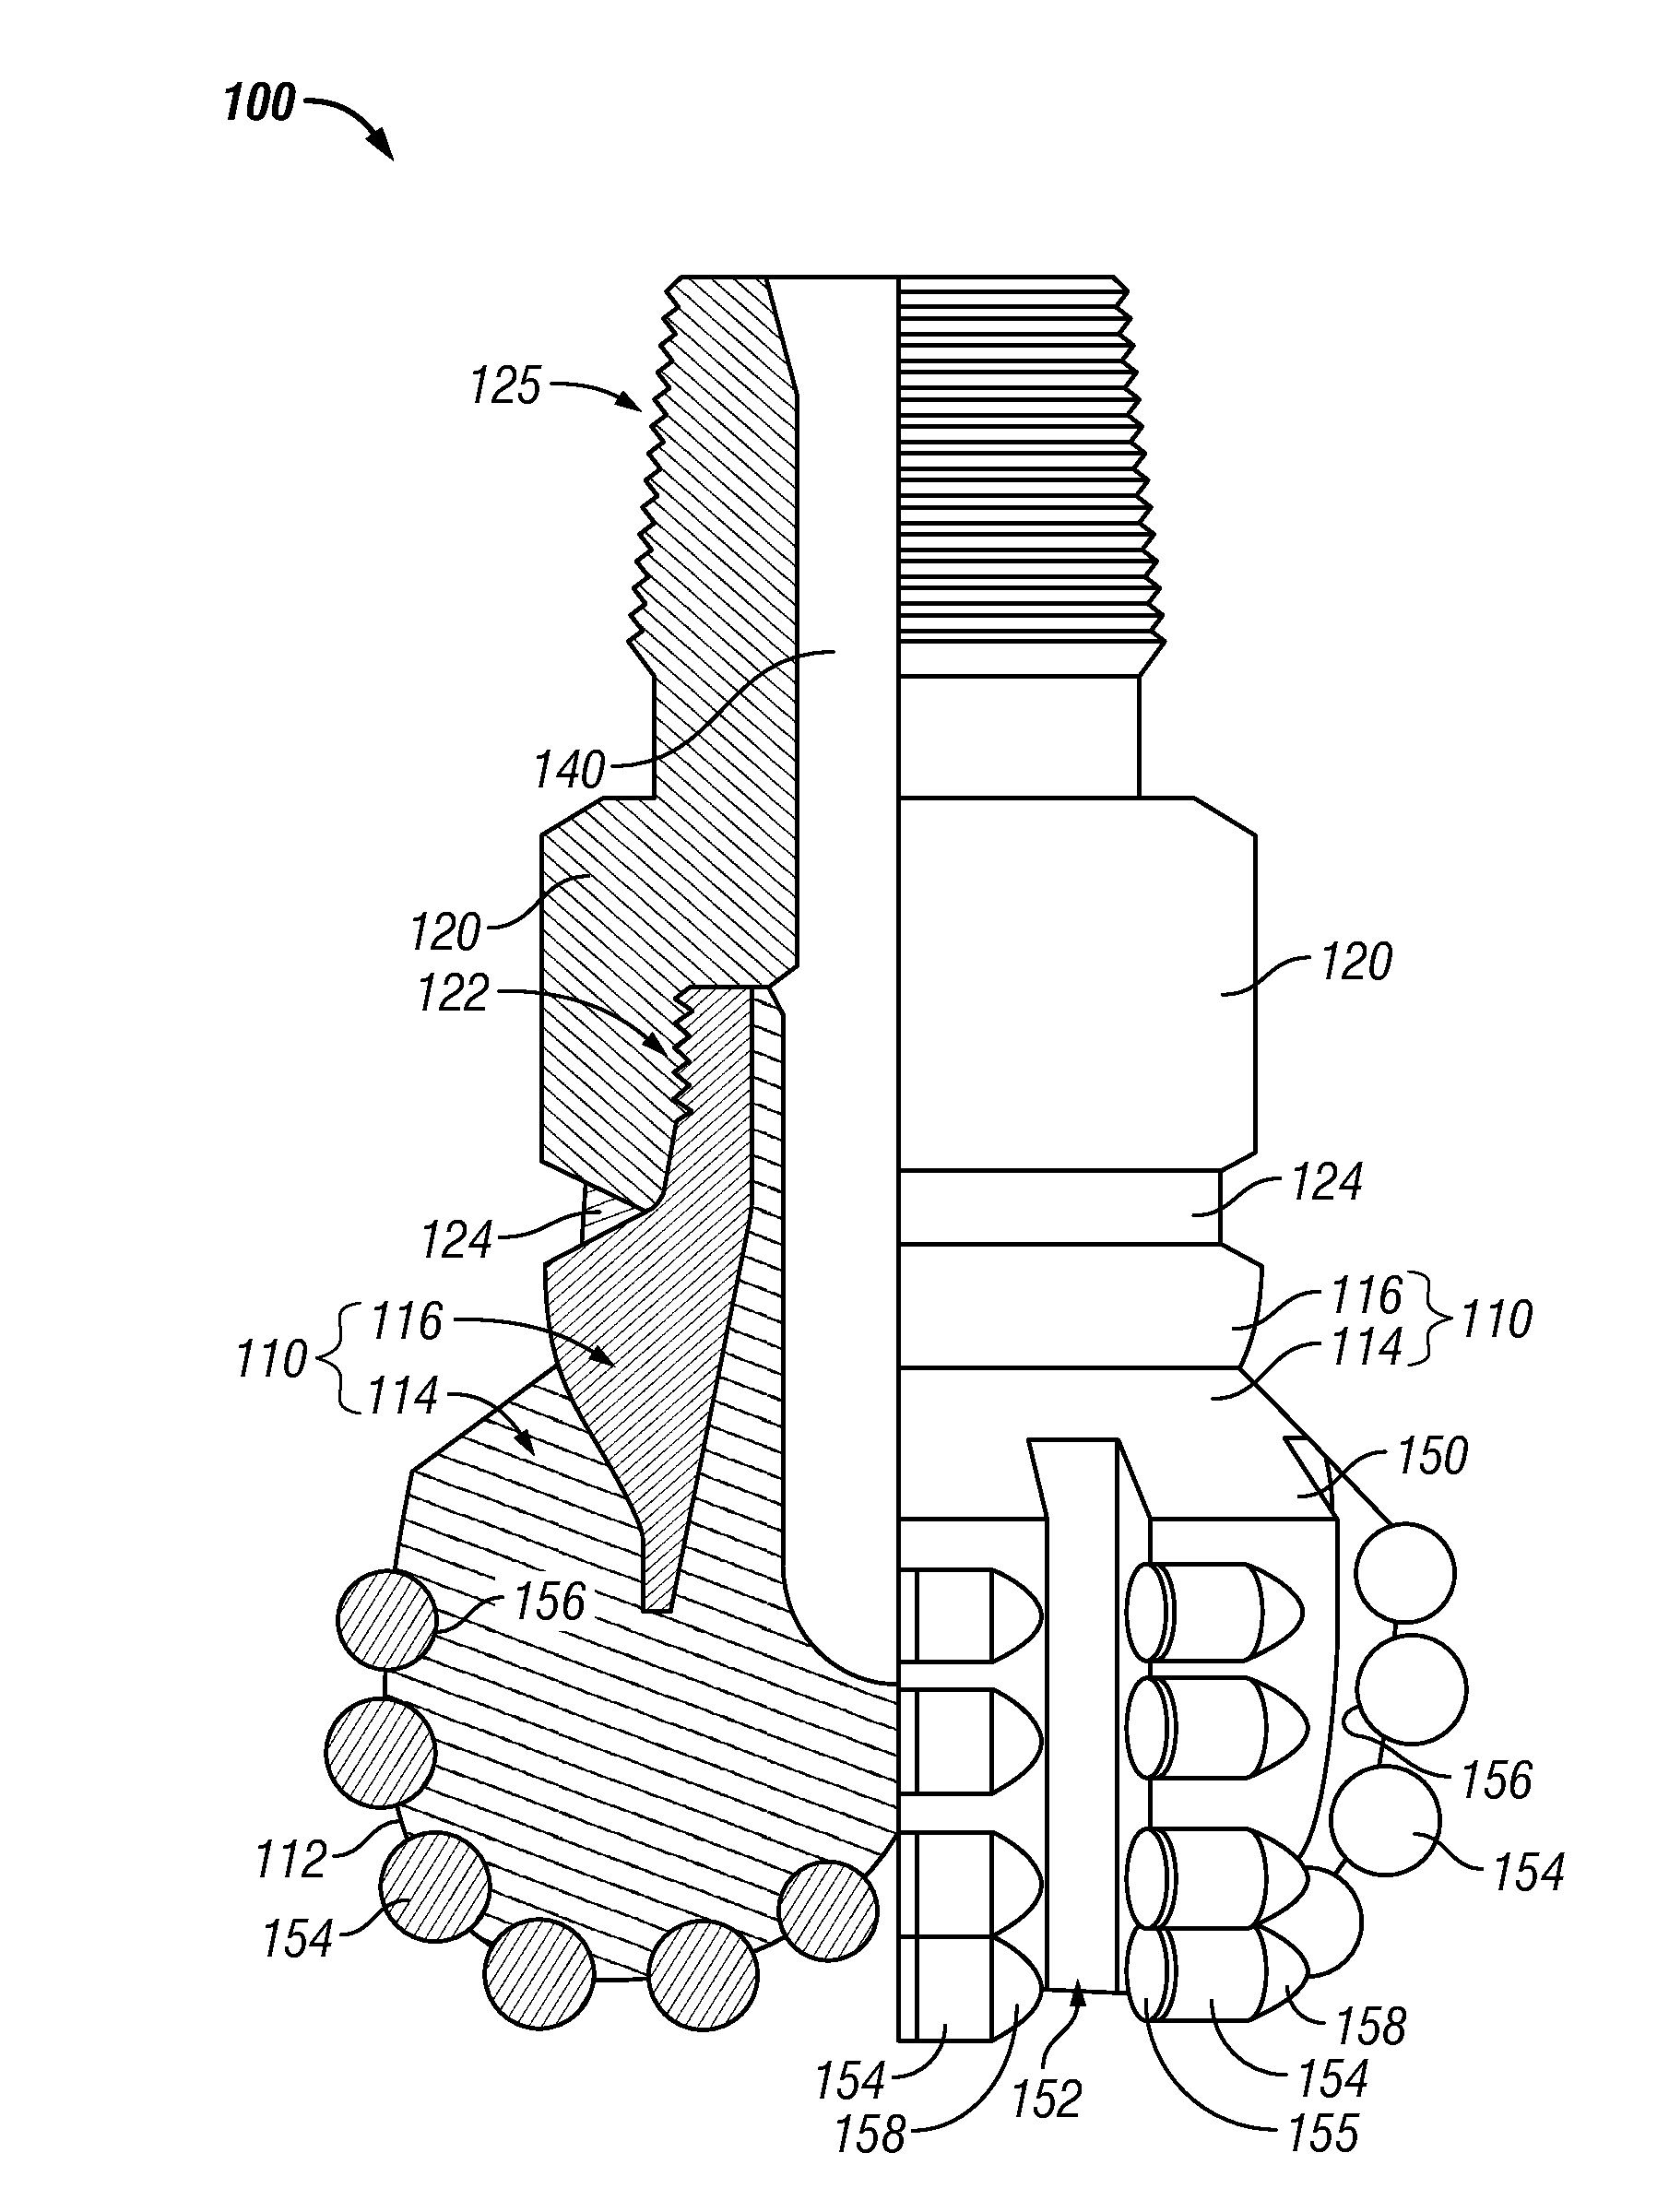 Apparatus and Methods for Detecting Performance Data in an Earth-Boring Drilling Tool